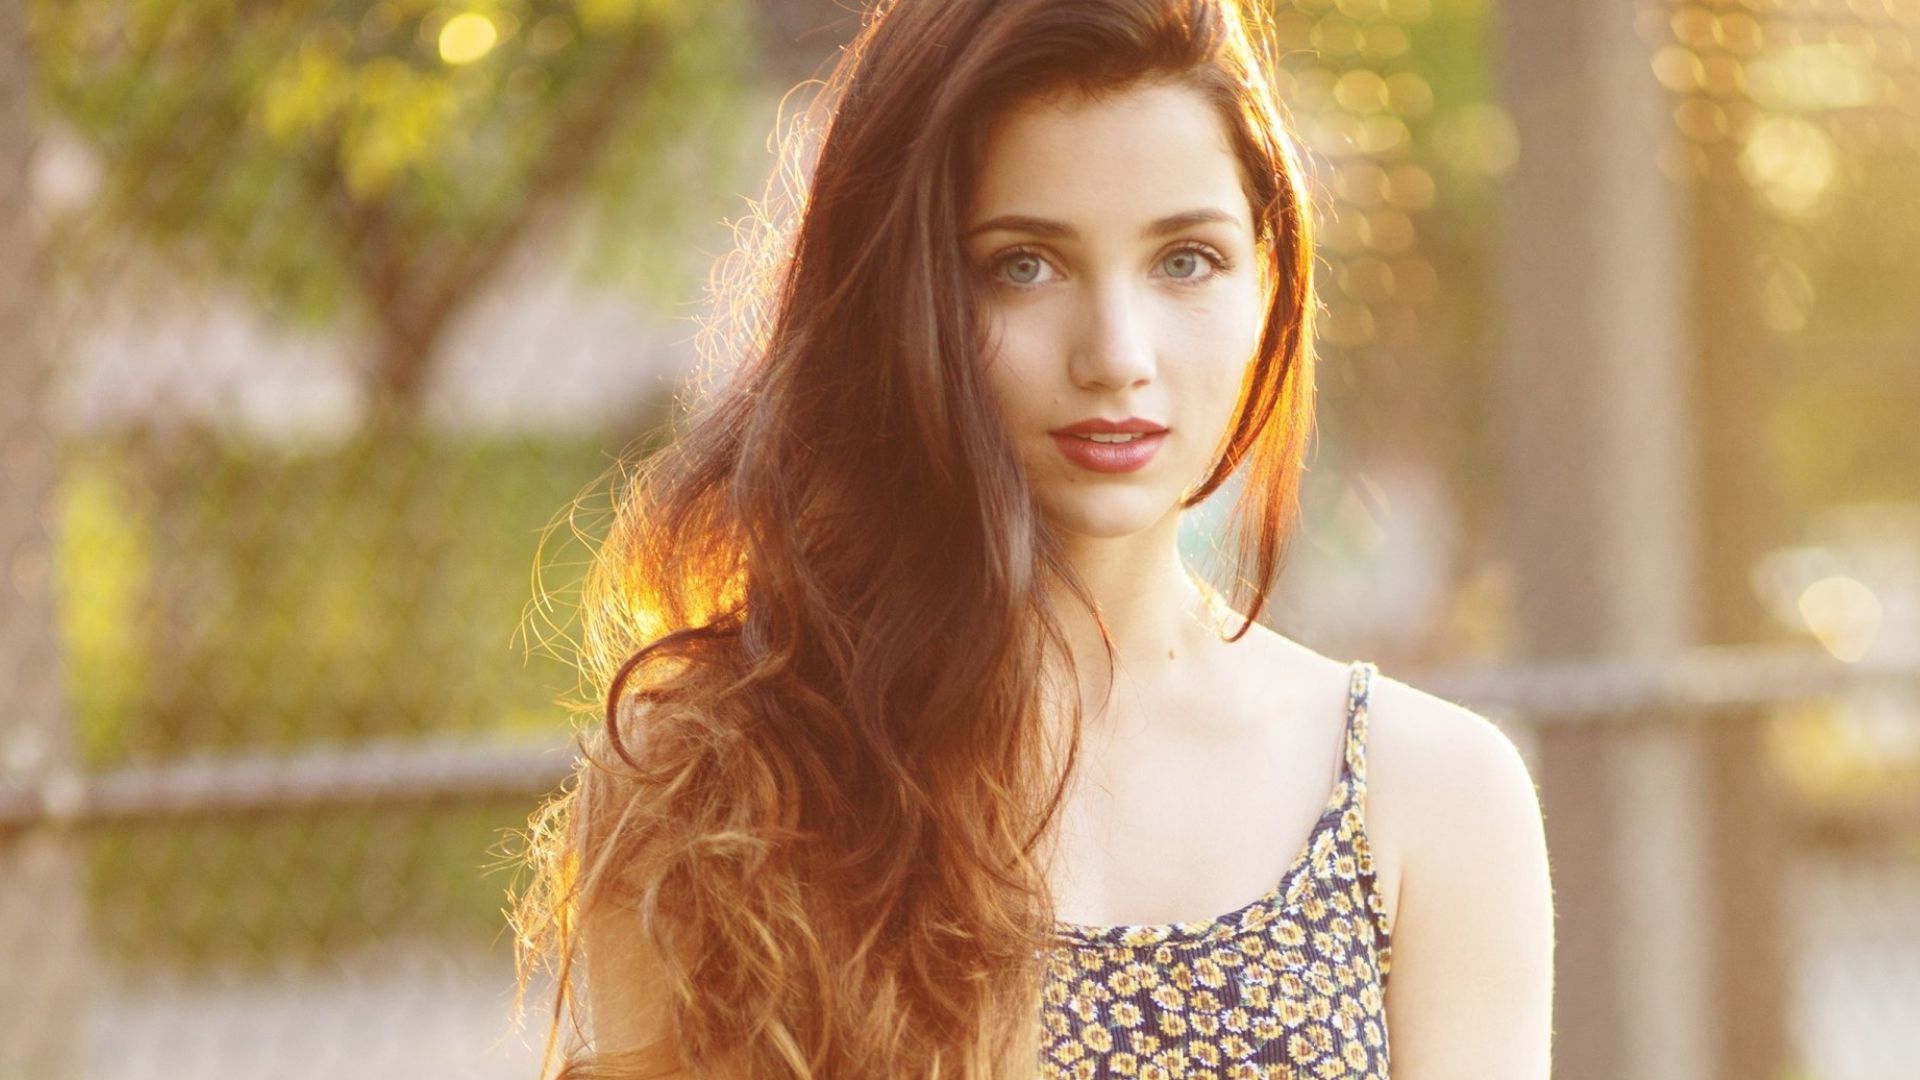 Emily Rudd - Actress And Model Known As Emilysteaparty On The Social Media Platforms